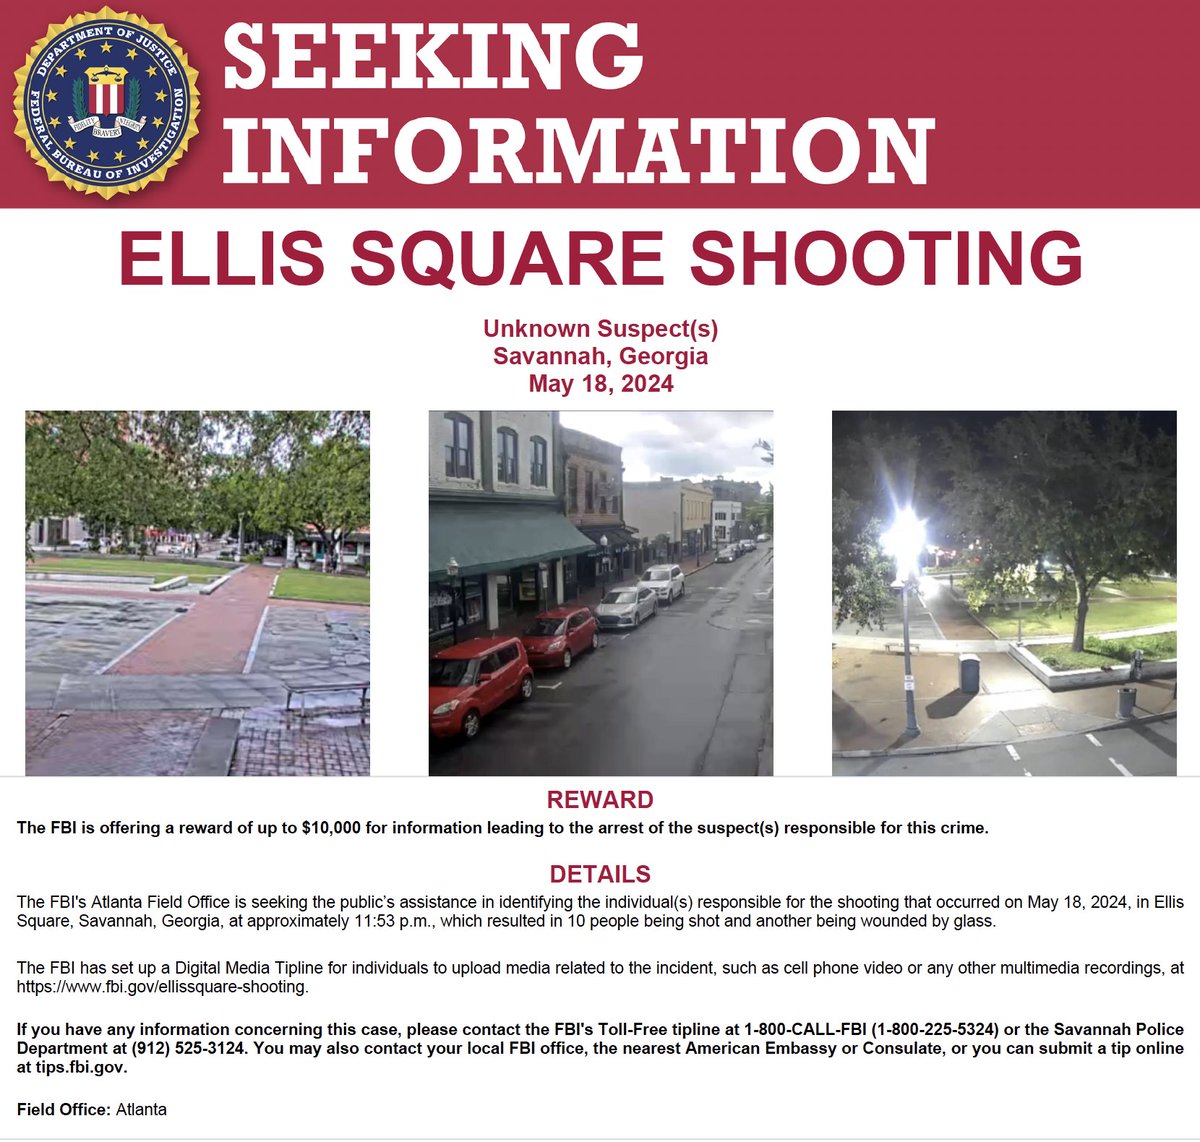 The #FBI is offering a reward of up to $10,000 for information leading to the arrest of the suspects) involved in the Ellis Square Shooting that took place in Savannah, GA on 5/18/2024. 
tips.fbi.gov/digitalmedia/d…